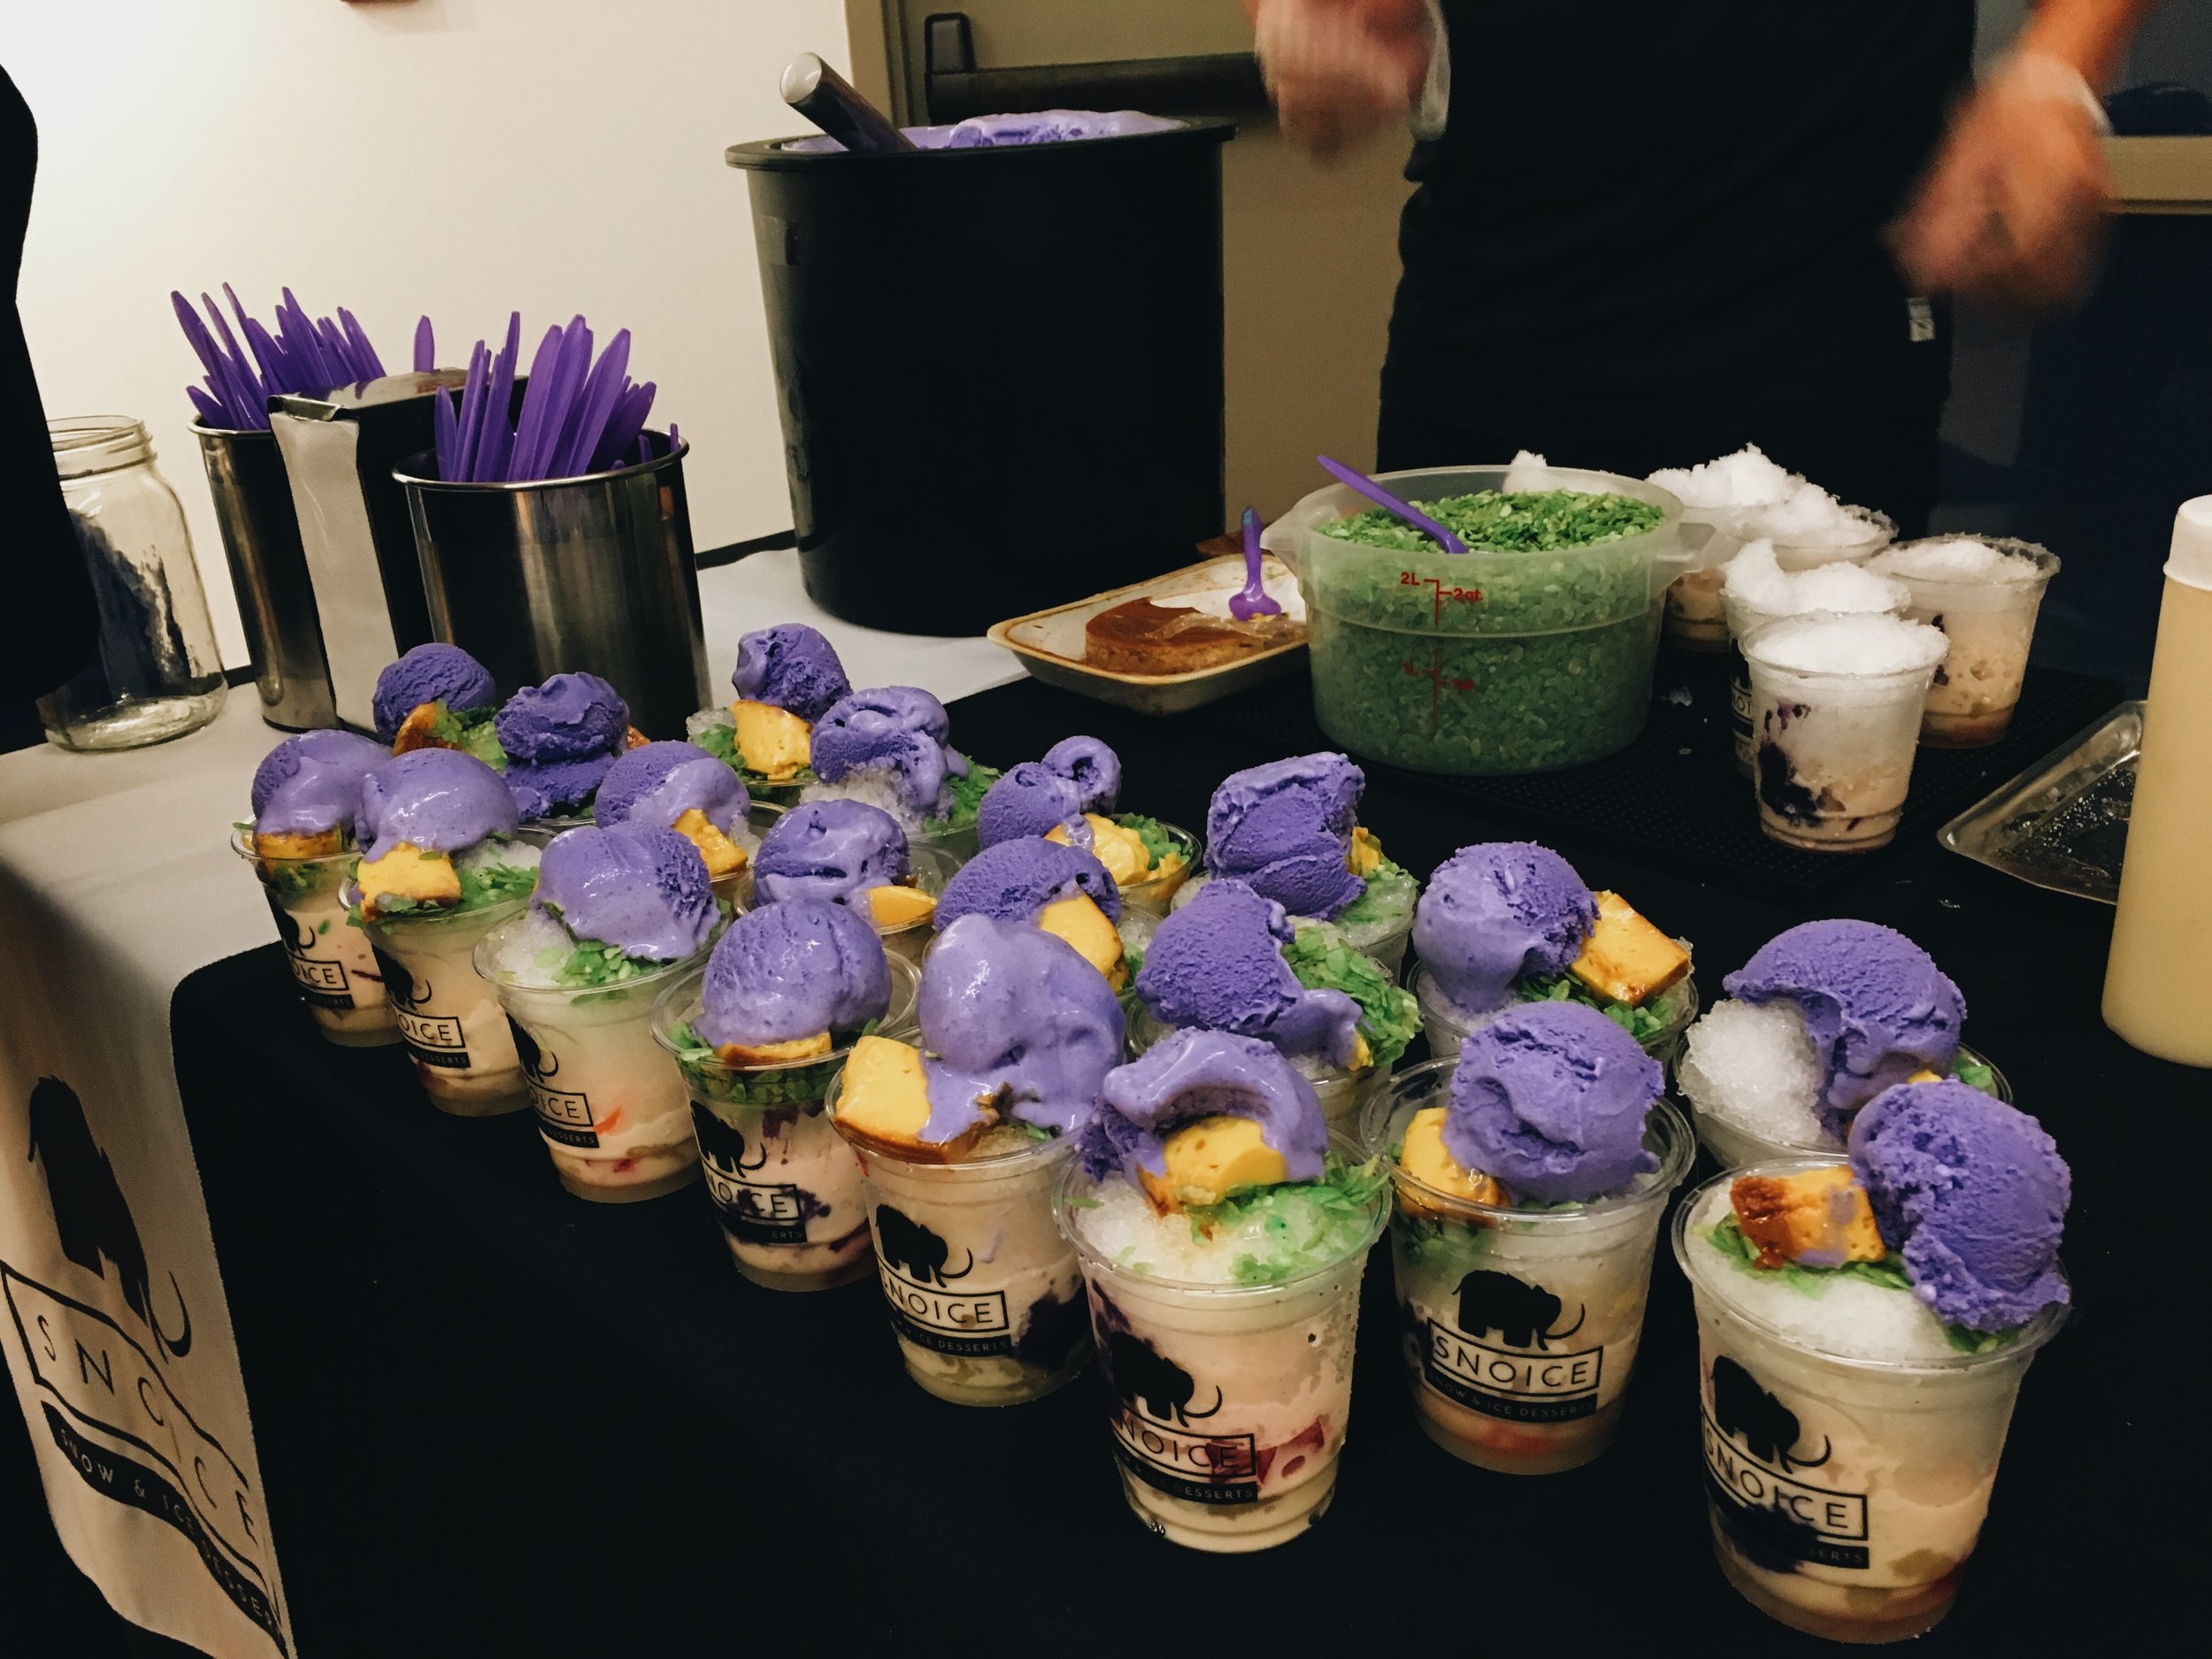  (2/2) A close-up of our mini halo-halos. We served our original halo-halo at the opening night reception of Asian Story Theater's production of "Halo-Halo."&nbsp; 